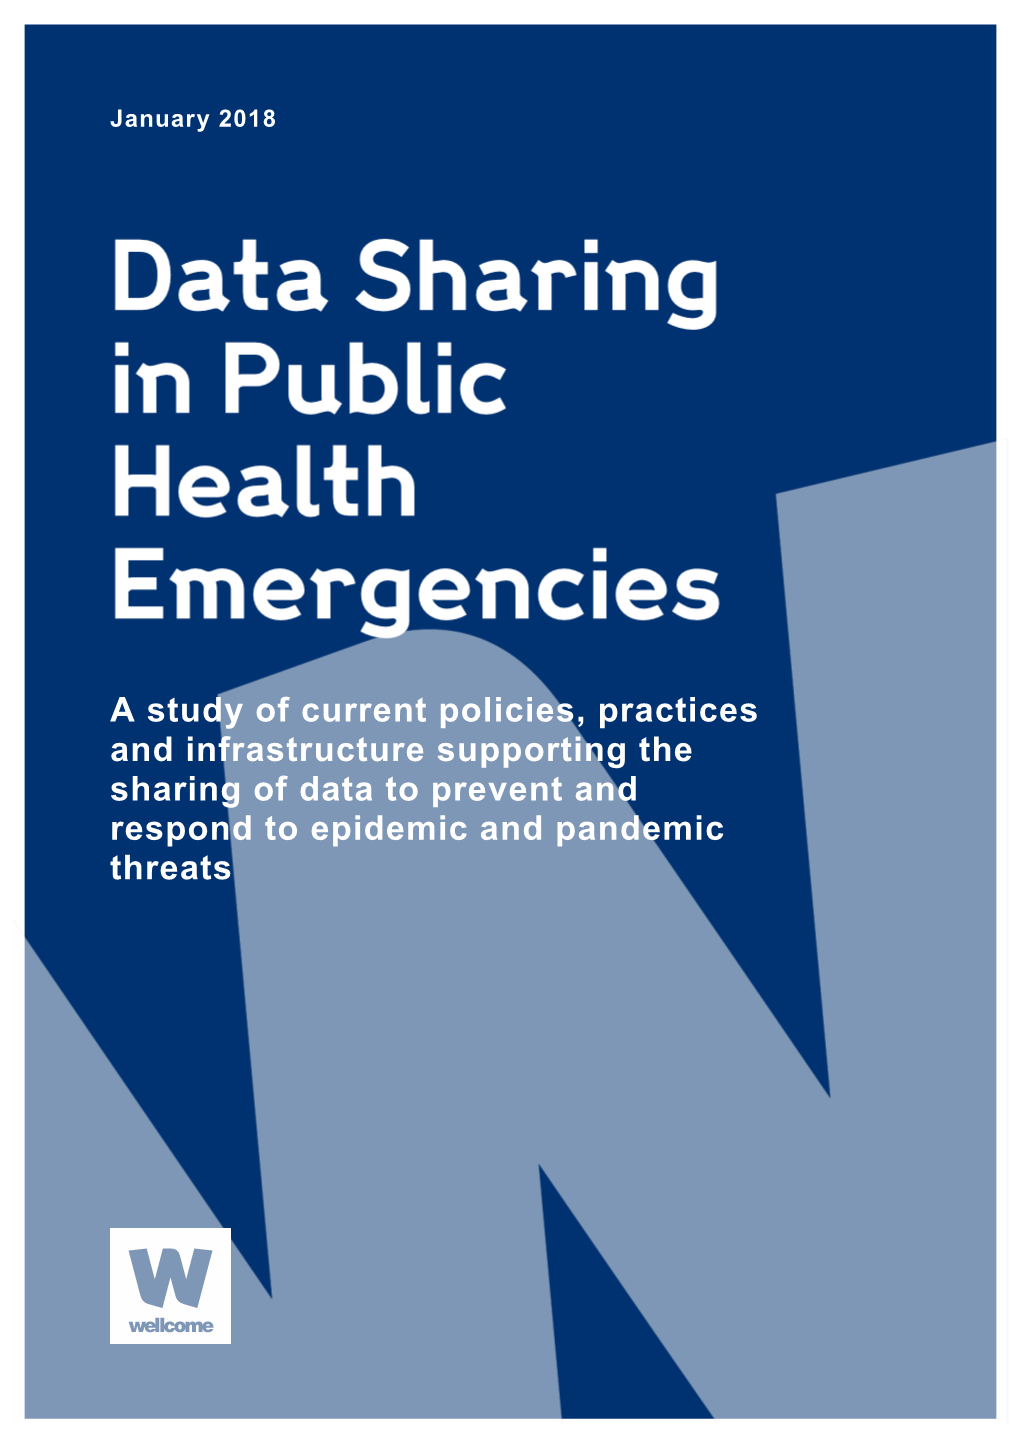 A Study of Current Policies, Practices and Infrastructure Supporting the Sharing of Data to Prevent and Respond to Epidemic and Pandemic Threats